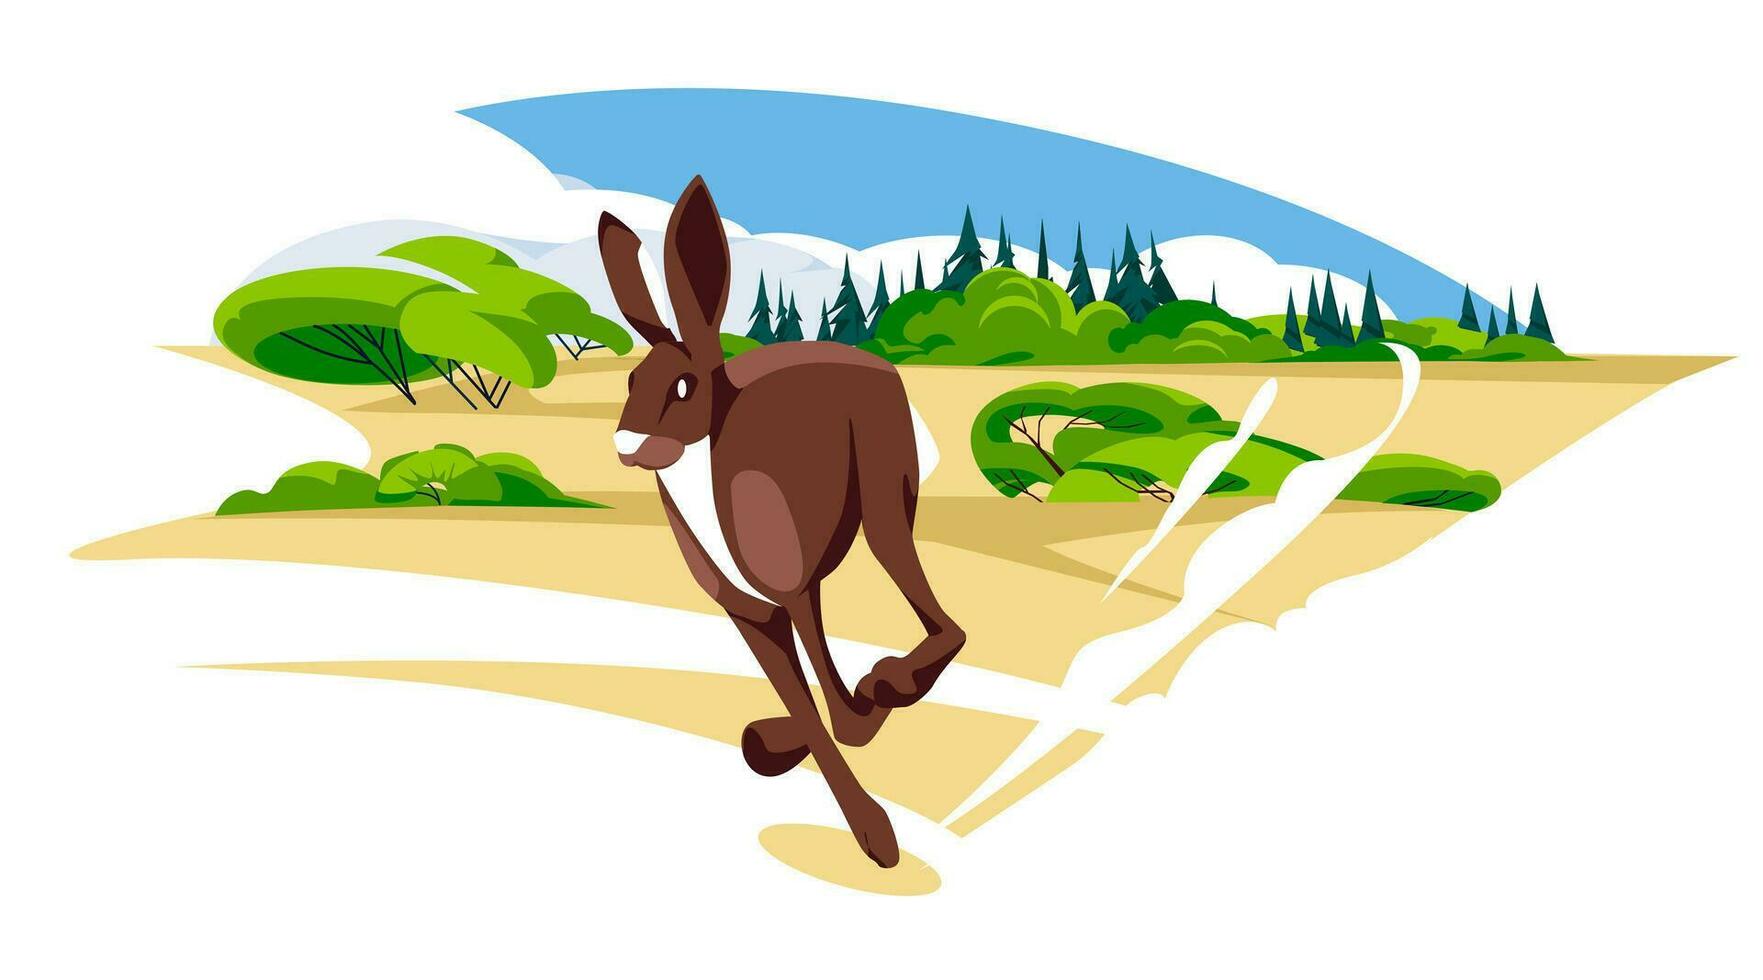 A hare runs alone on a summer meadow. Wild animals are common. Coniferous forest and clouds background. Vector flat illustration